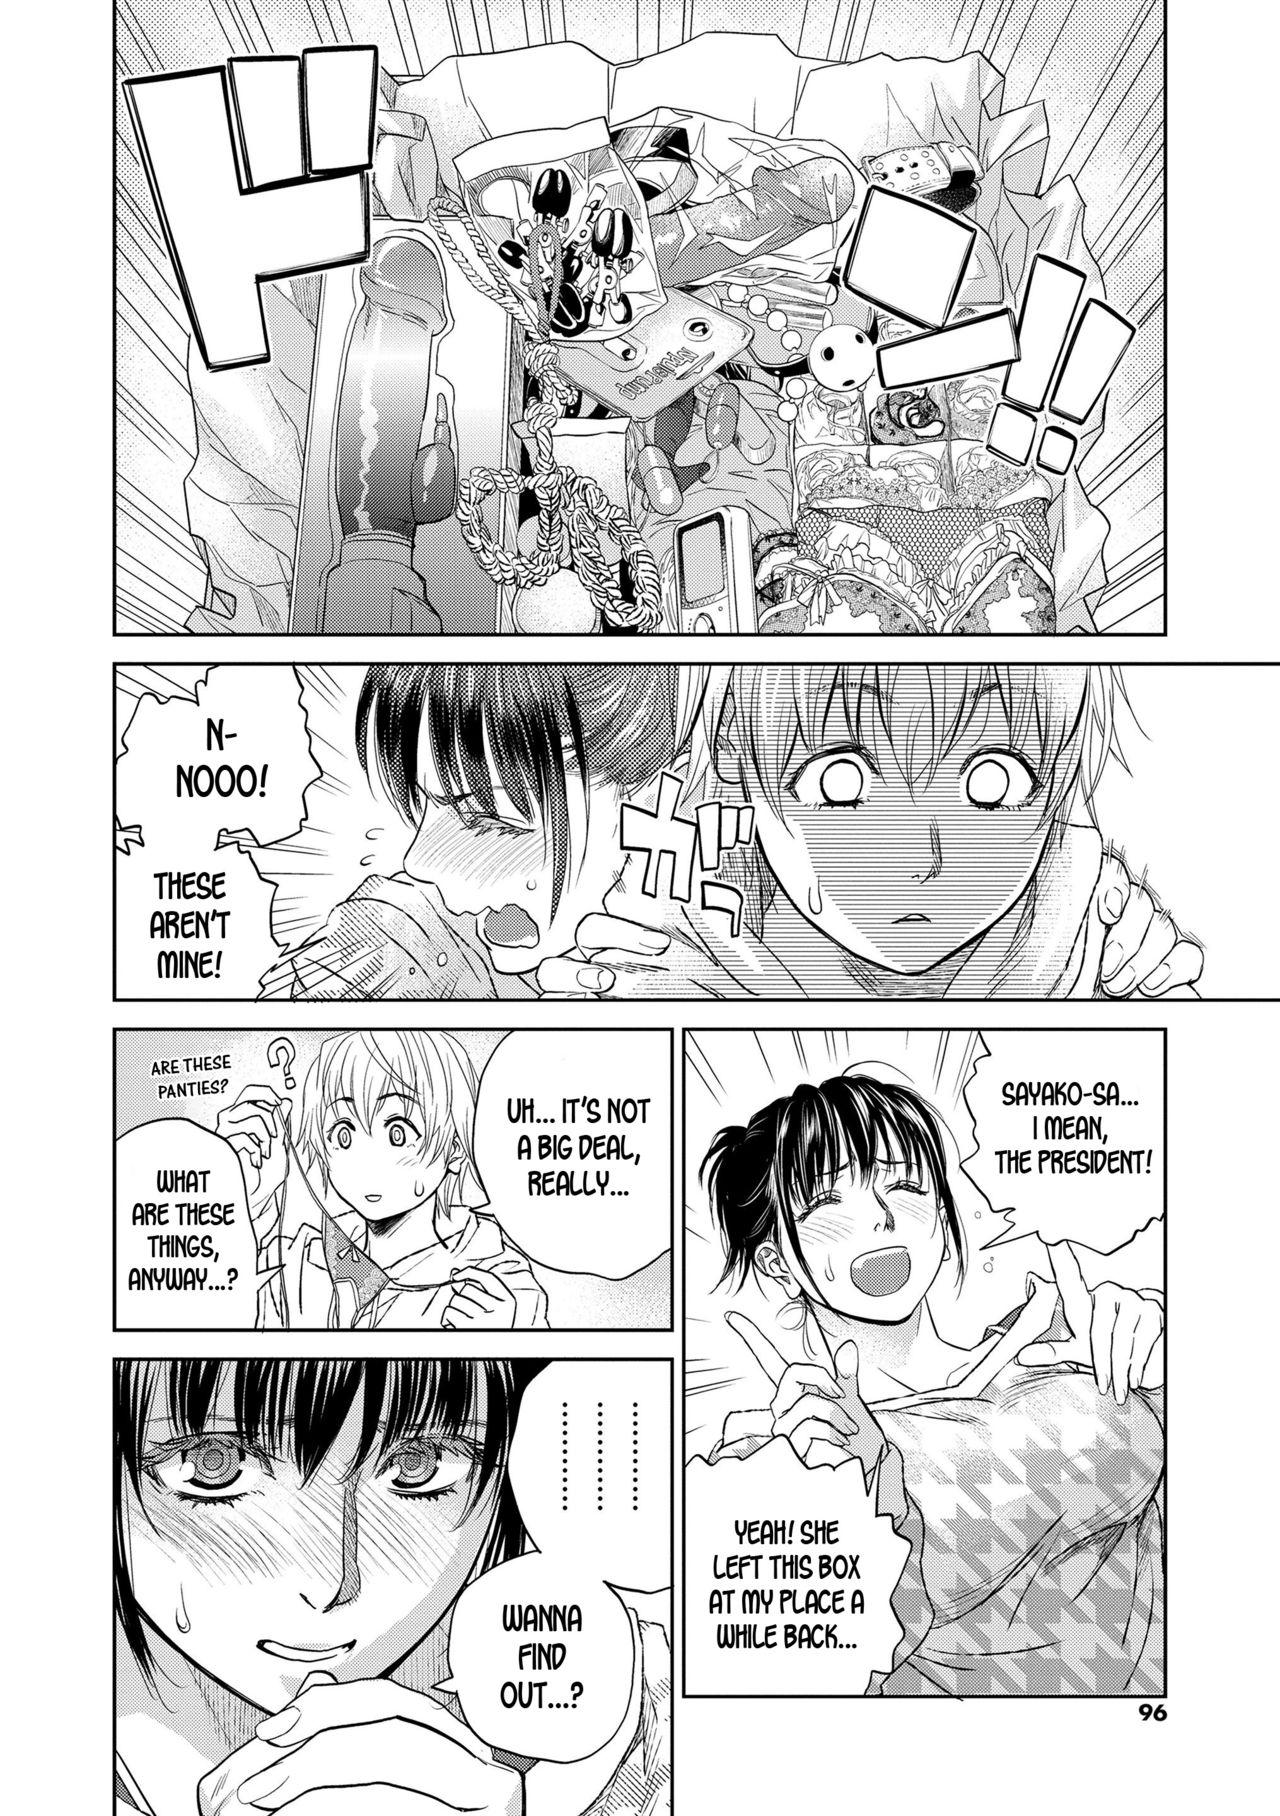 Boku to Itoko no Onee-san to | Together With My Older Cousin Ch. 5 3